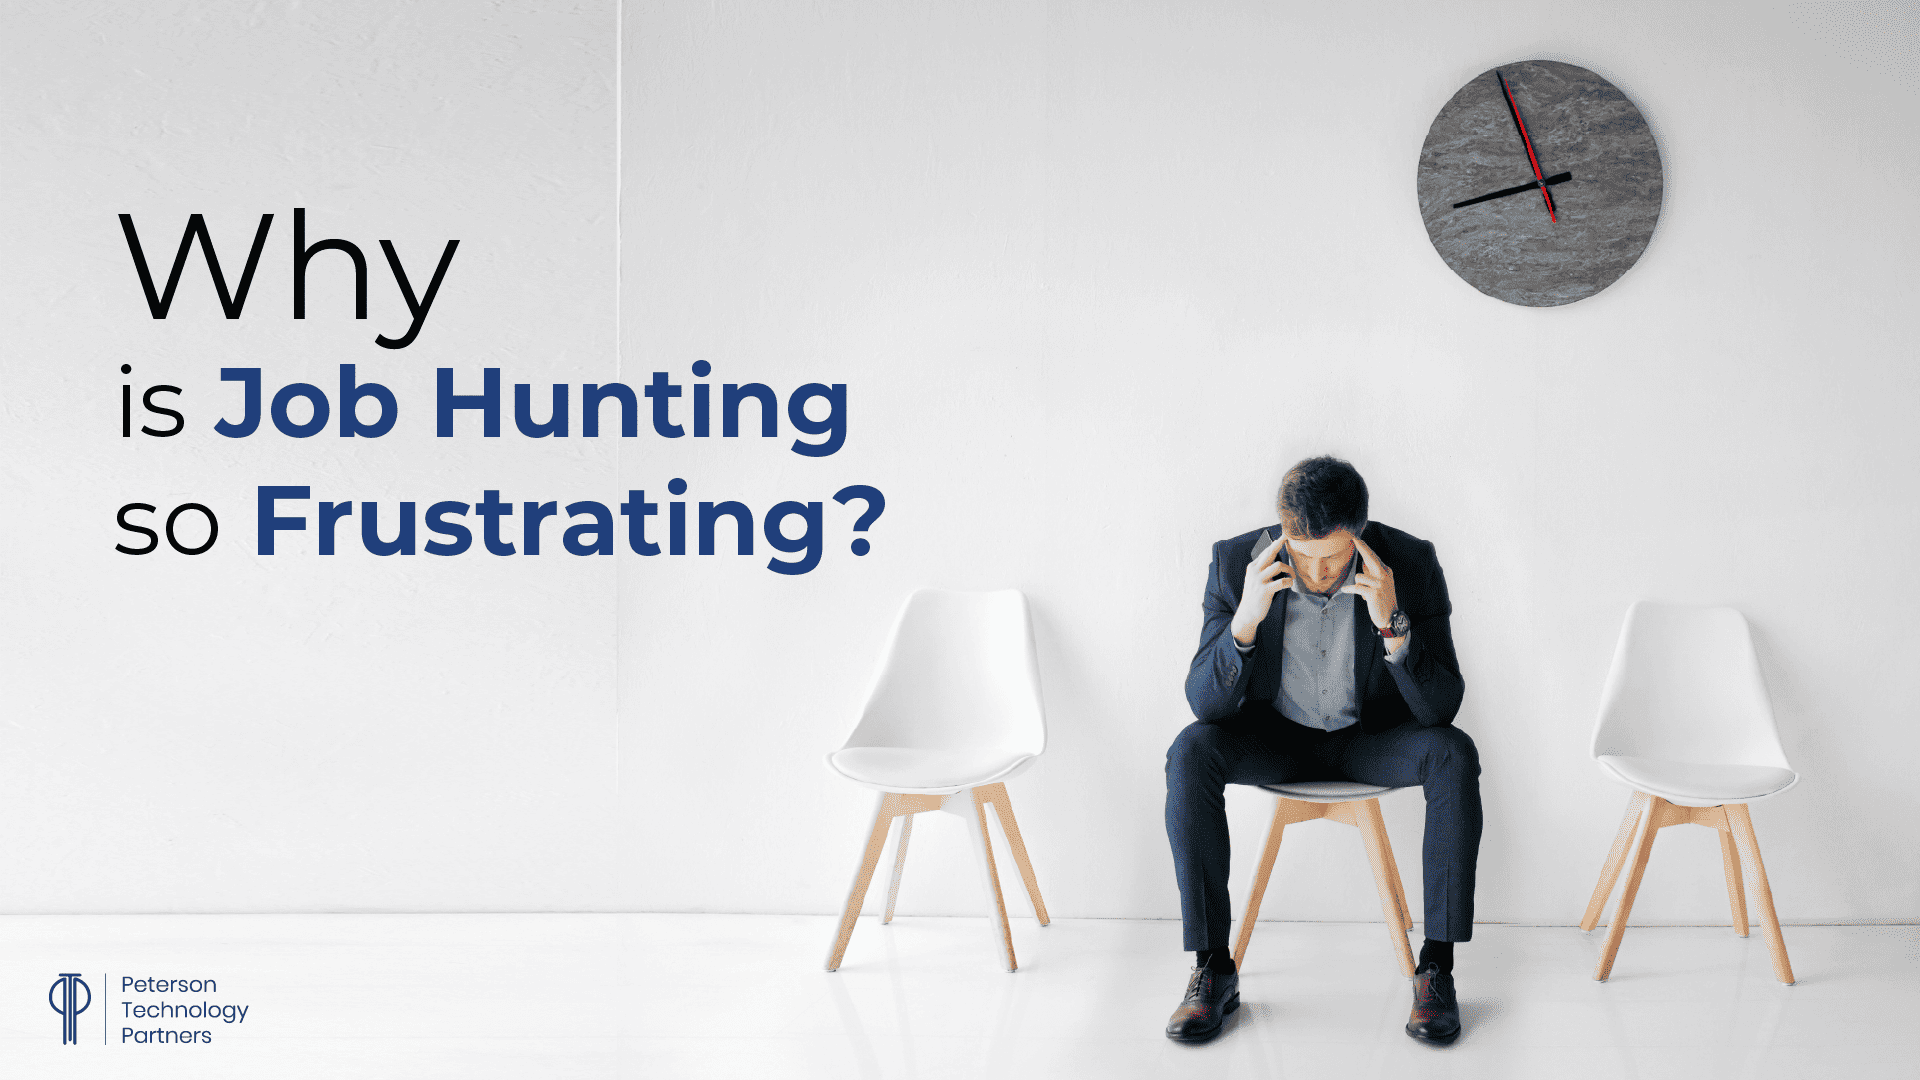 Why is Job Hunting so Frustrating?